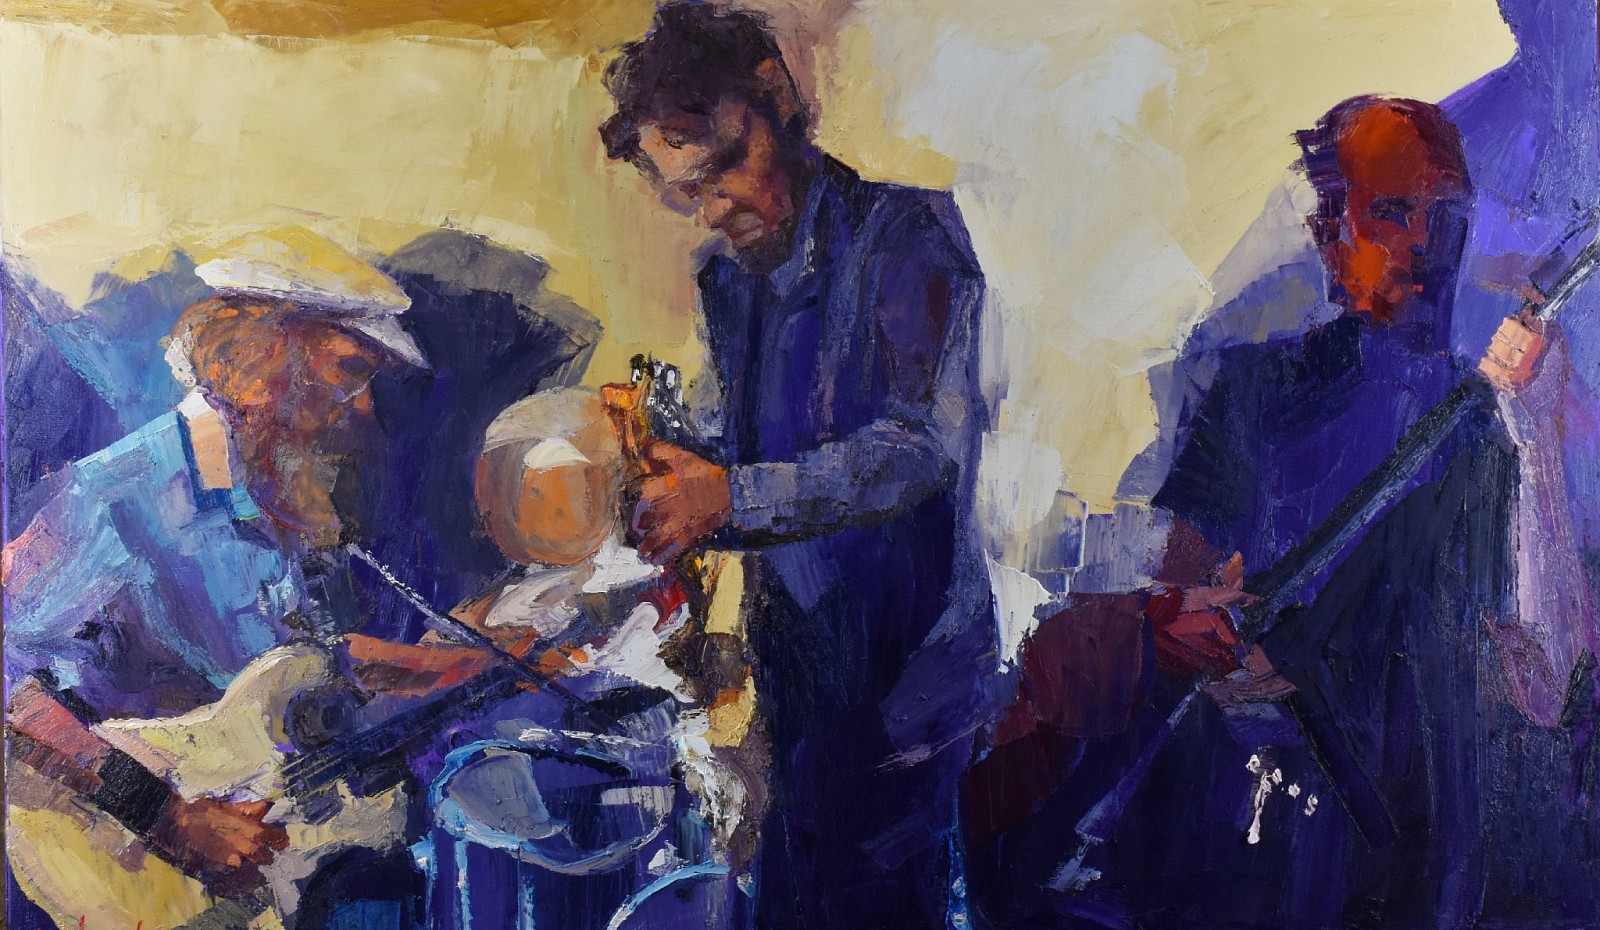 James Michalopoulos, Driving It Home
Oil on Canvas, 36 x 60 in.
This work is currently on display at the Jazz Museum in New Orleans as a part of the "From the Fat Man to Mahalia: James Michalopoulos’ Music Paintings at the New Orleans Jazz Museum" Exhibition.
$23,000